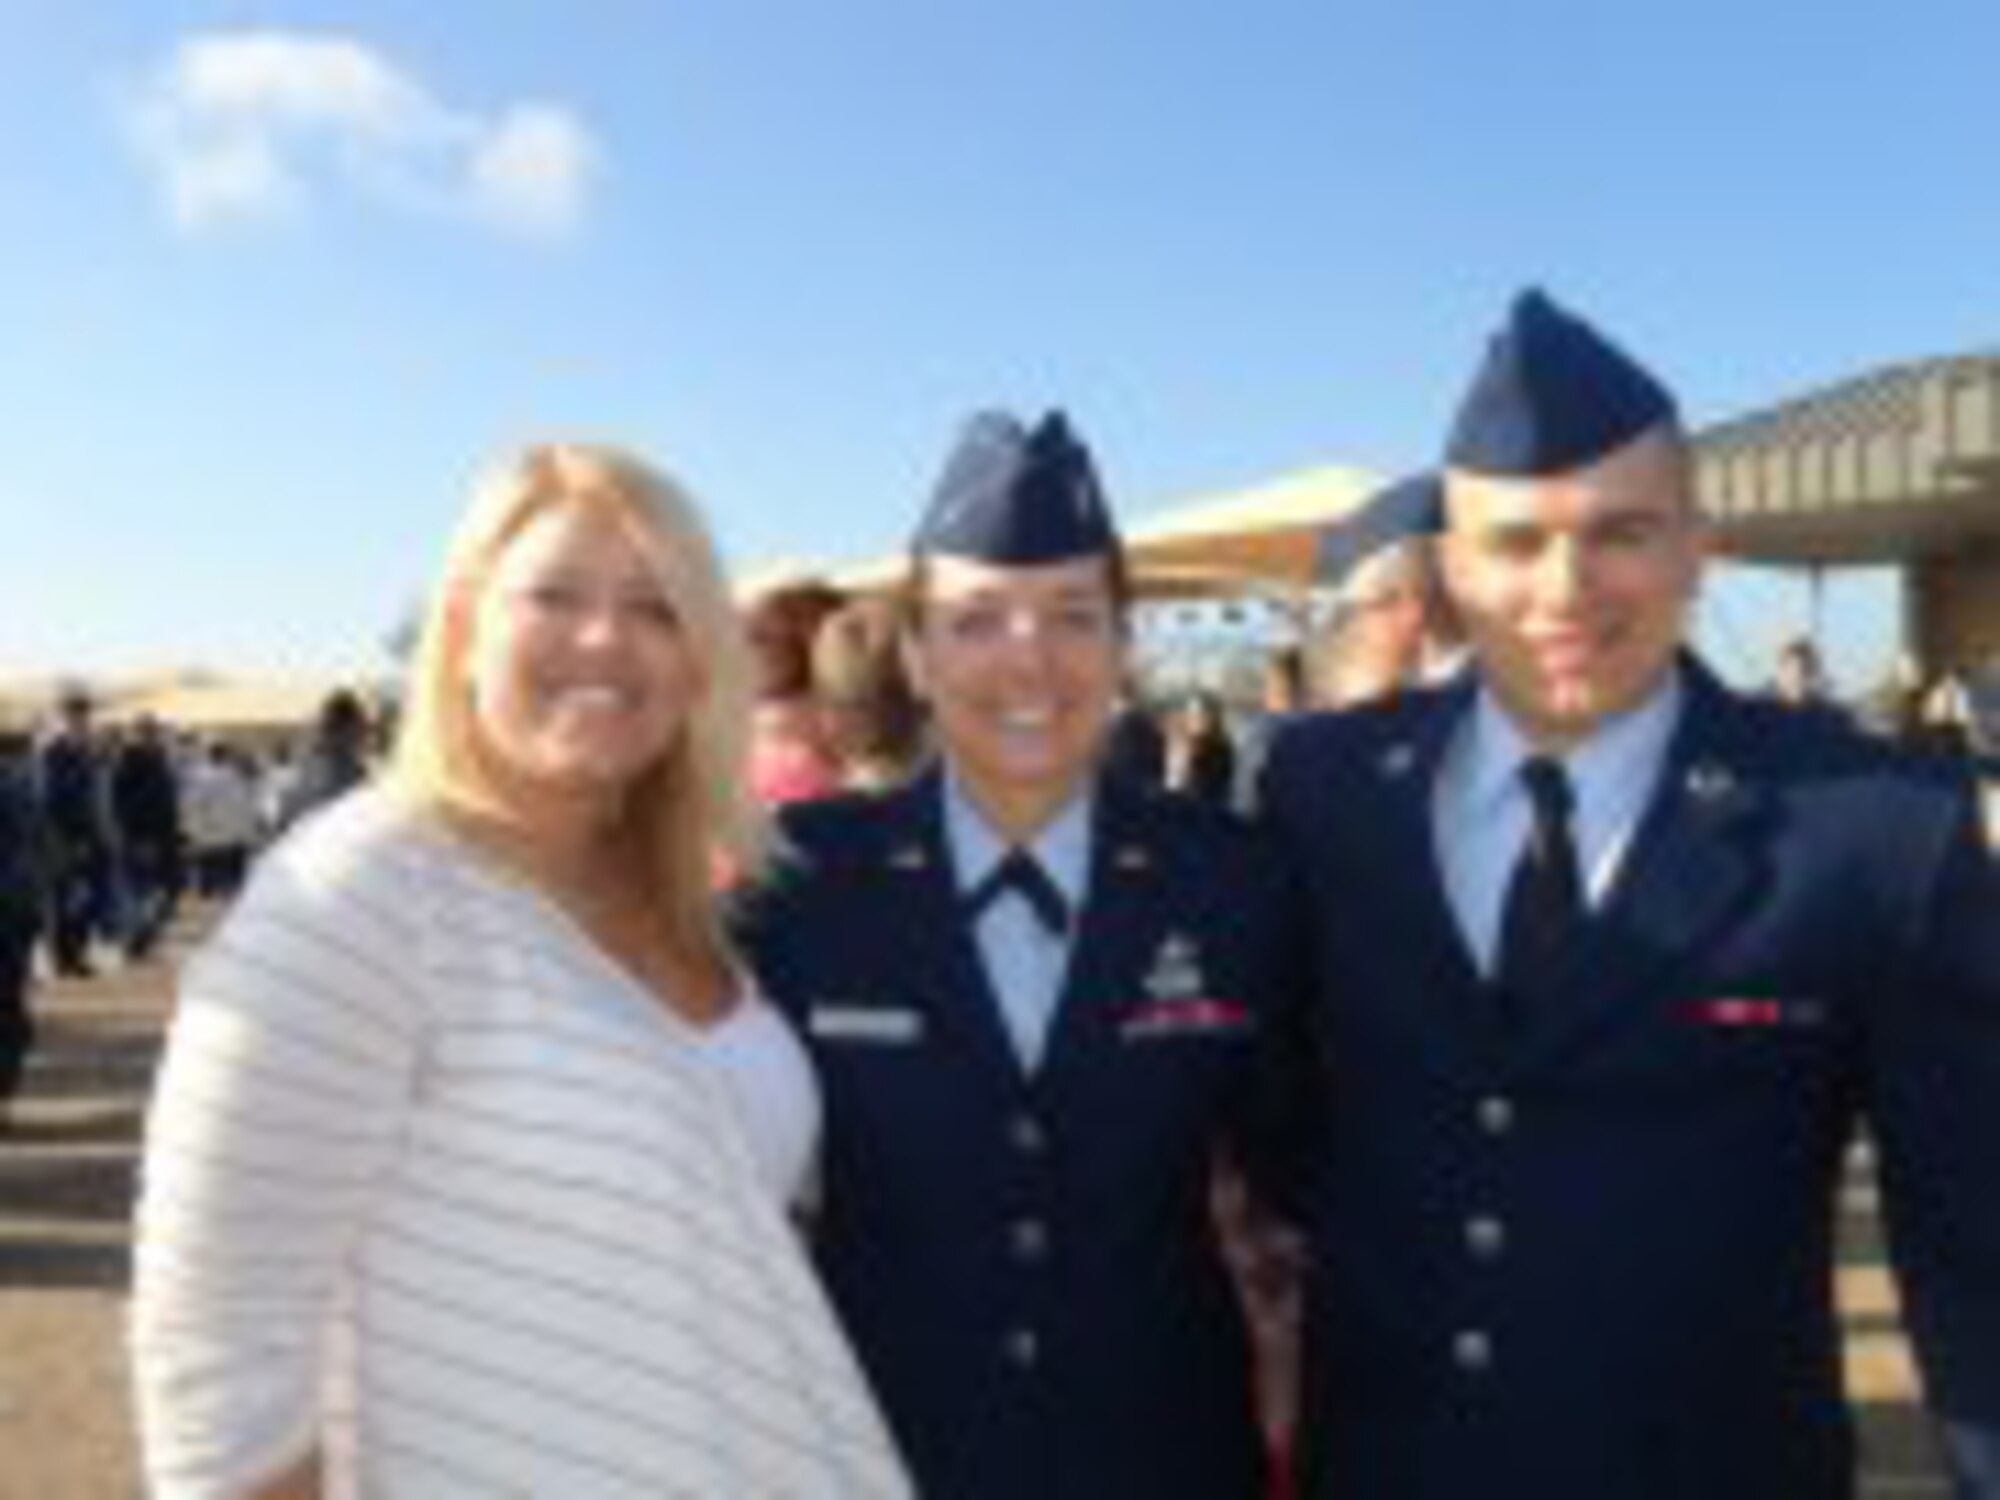 JBSA-SAN ANTONIO -- 2nd Lt. Kaylee Ausbun, 30th Space Wing Public Affairs deputy chief, stands with her older sister, Anna, and her younger brother, Amn. Caleb Hay on the parade grounds here Friday, March 15, 2013. Ausbun and her family spent the weekend in San Antonio celebrating Airman Hay's graduation. (U.S. Air Force by/ 2nd Lt. Kaylee Ausbun)